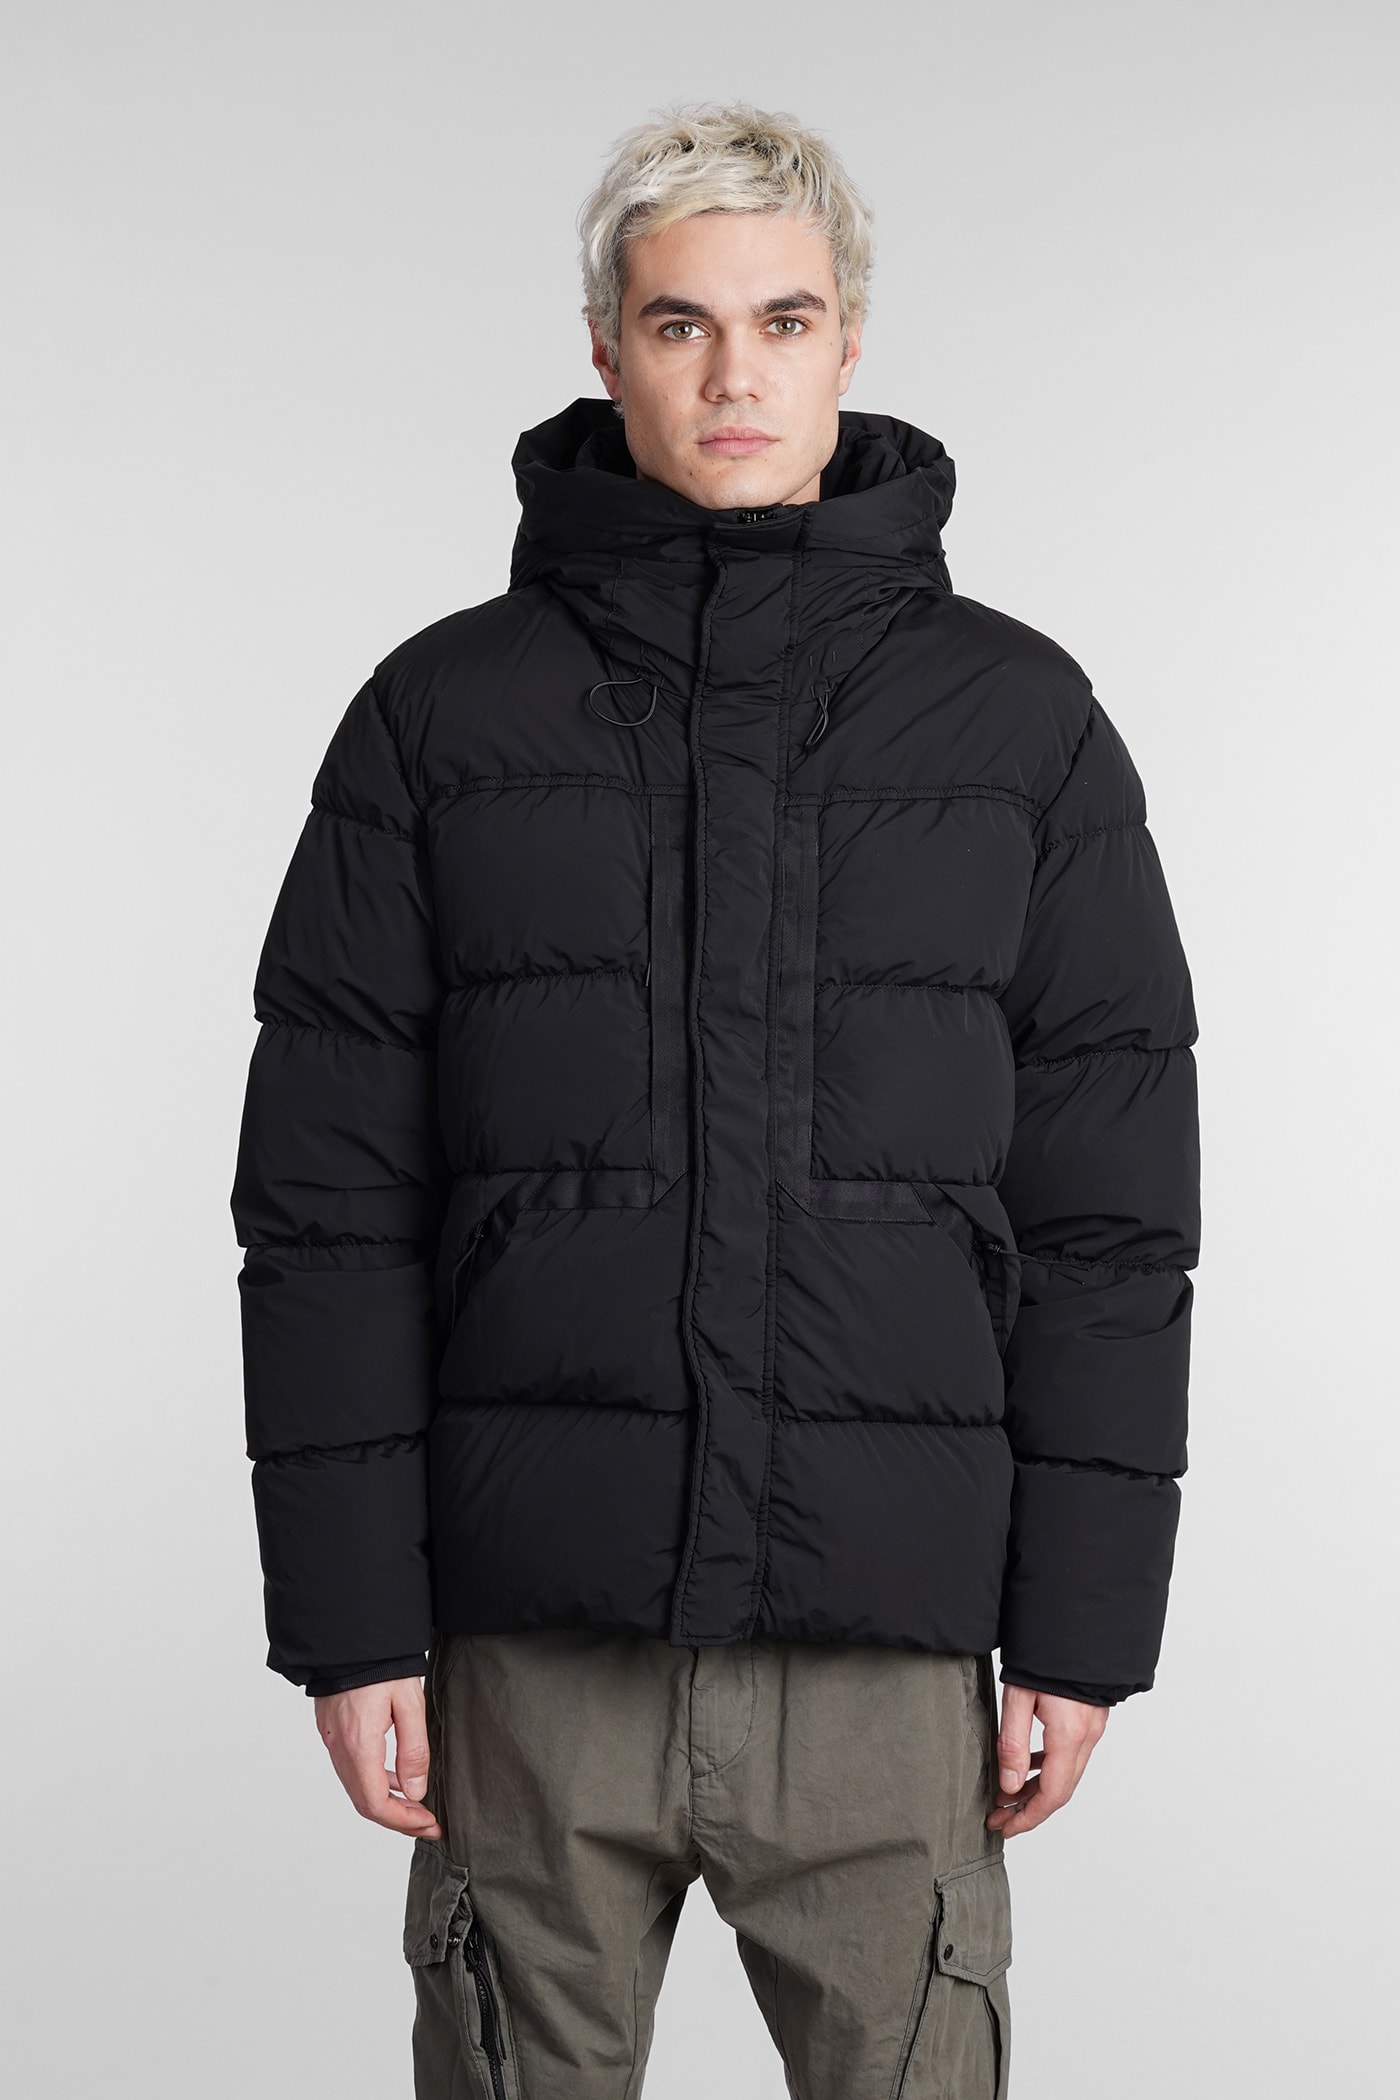 C.P. Company Black Quilted Down Jacket | Smart Closet